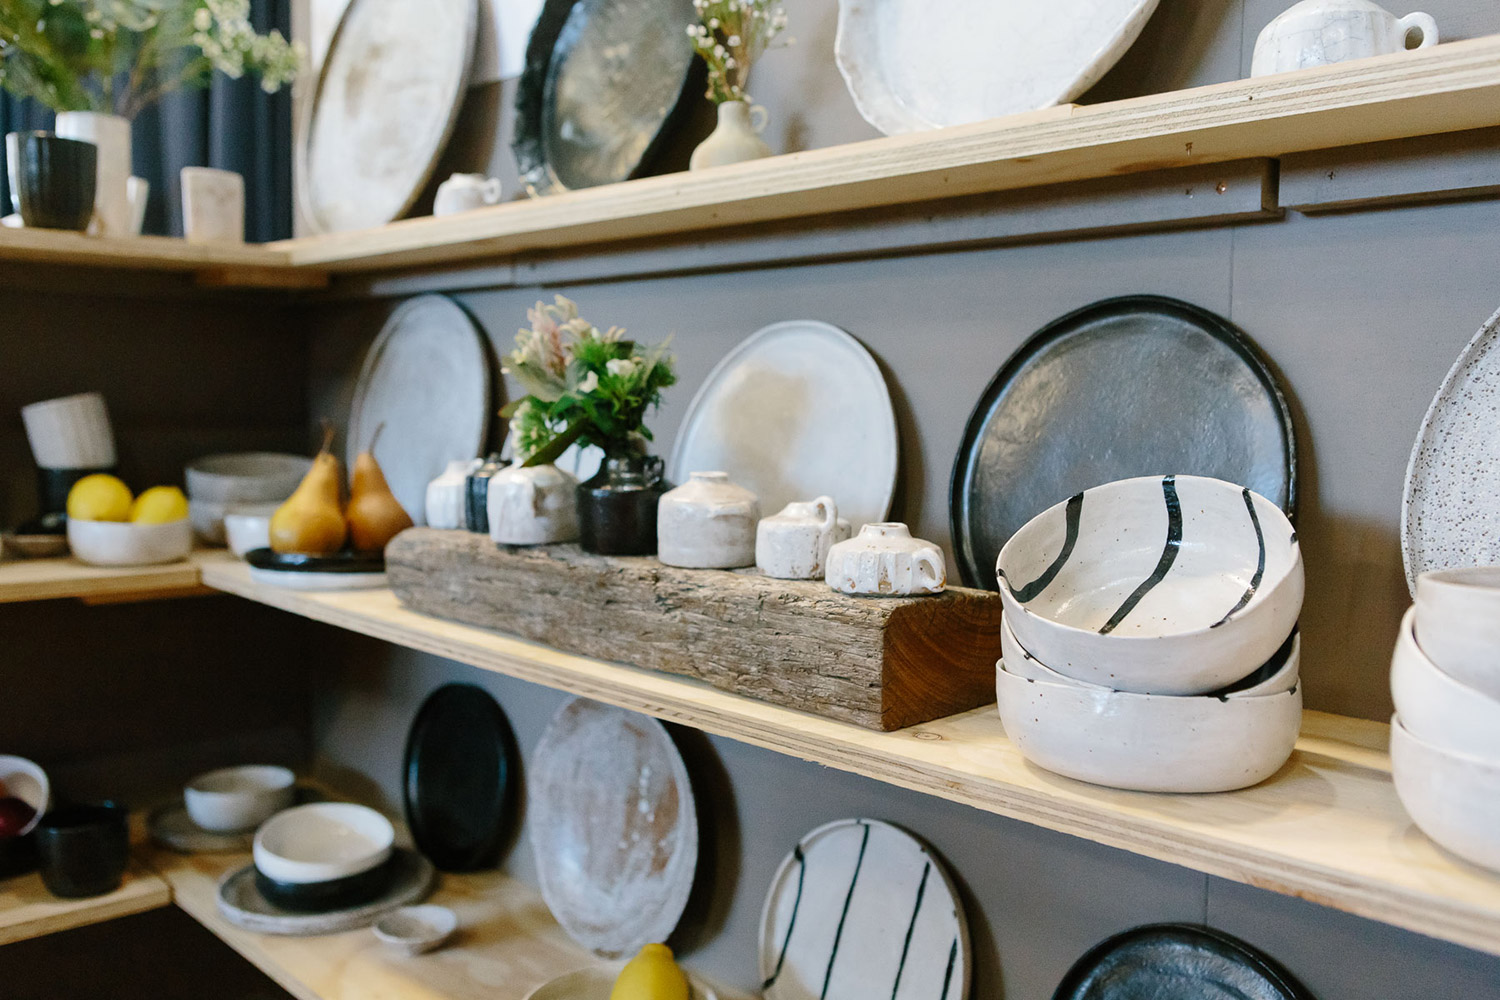 Handmade ceramics from Two Warm Hands